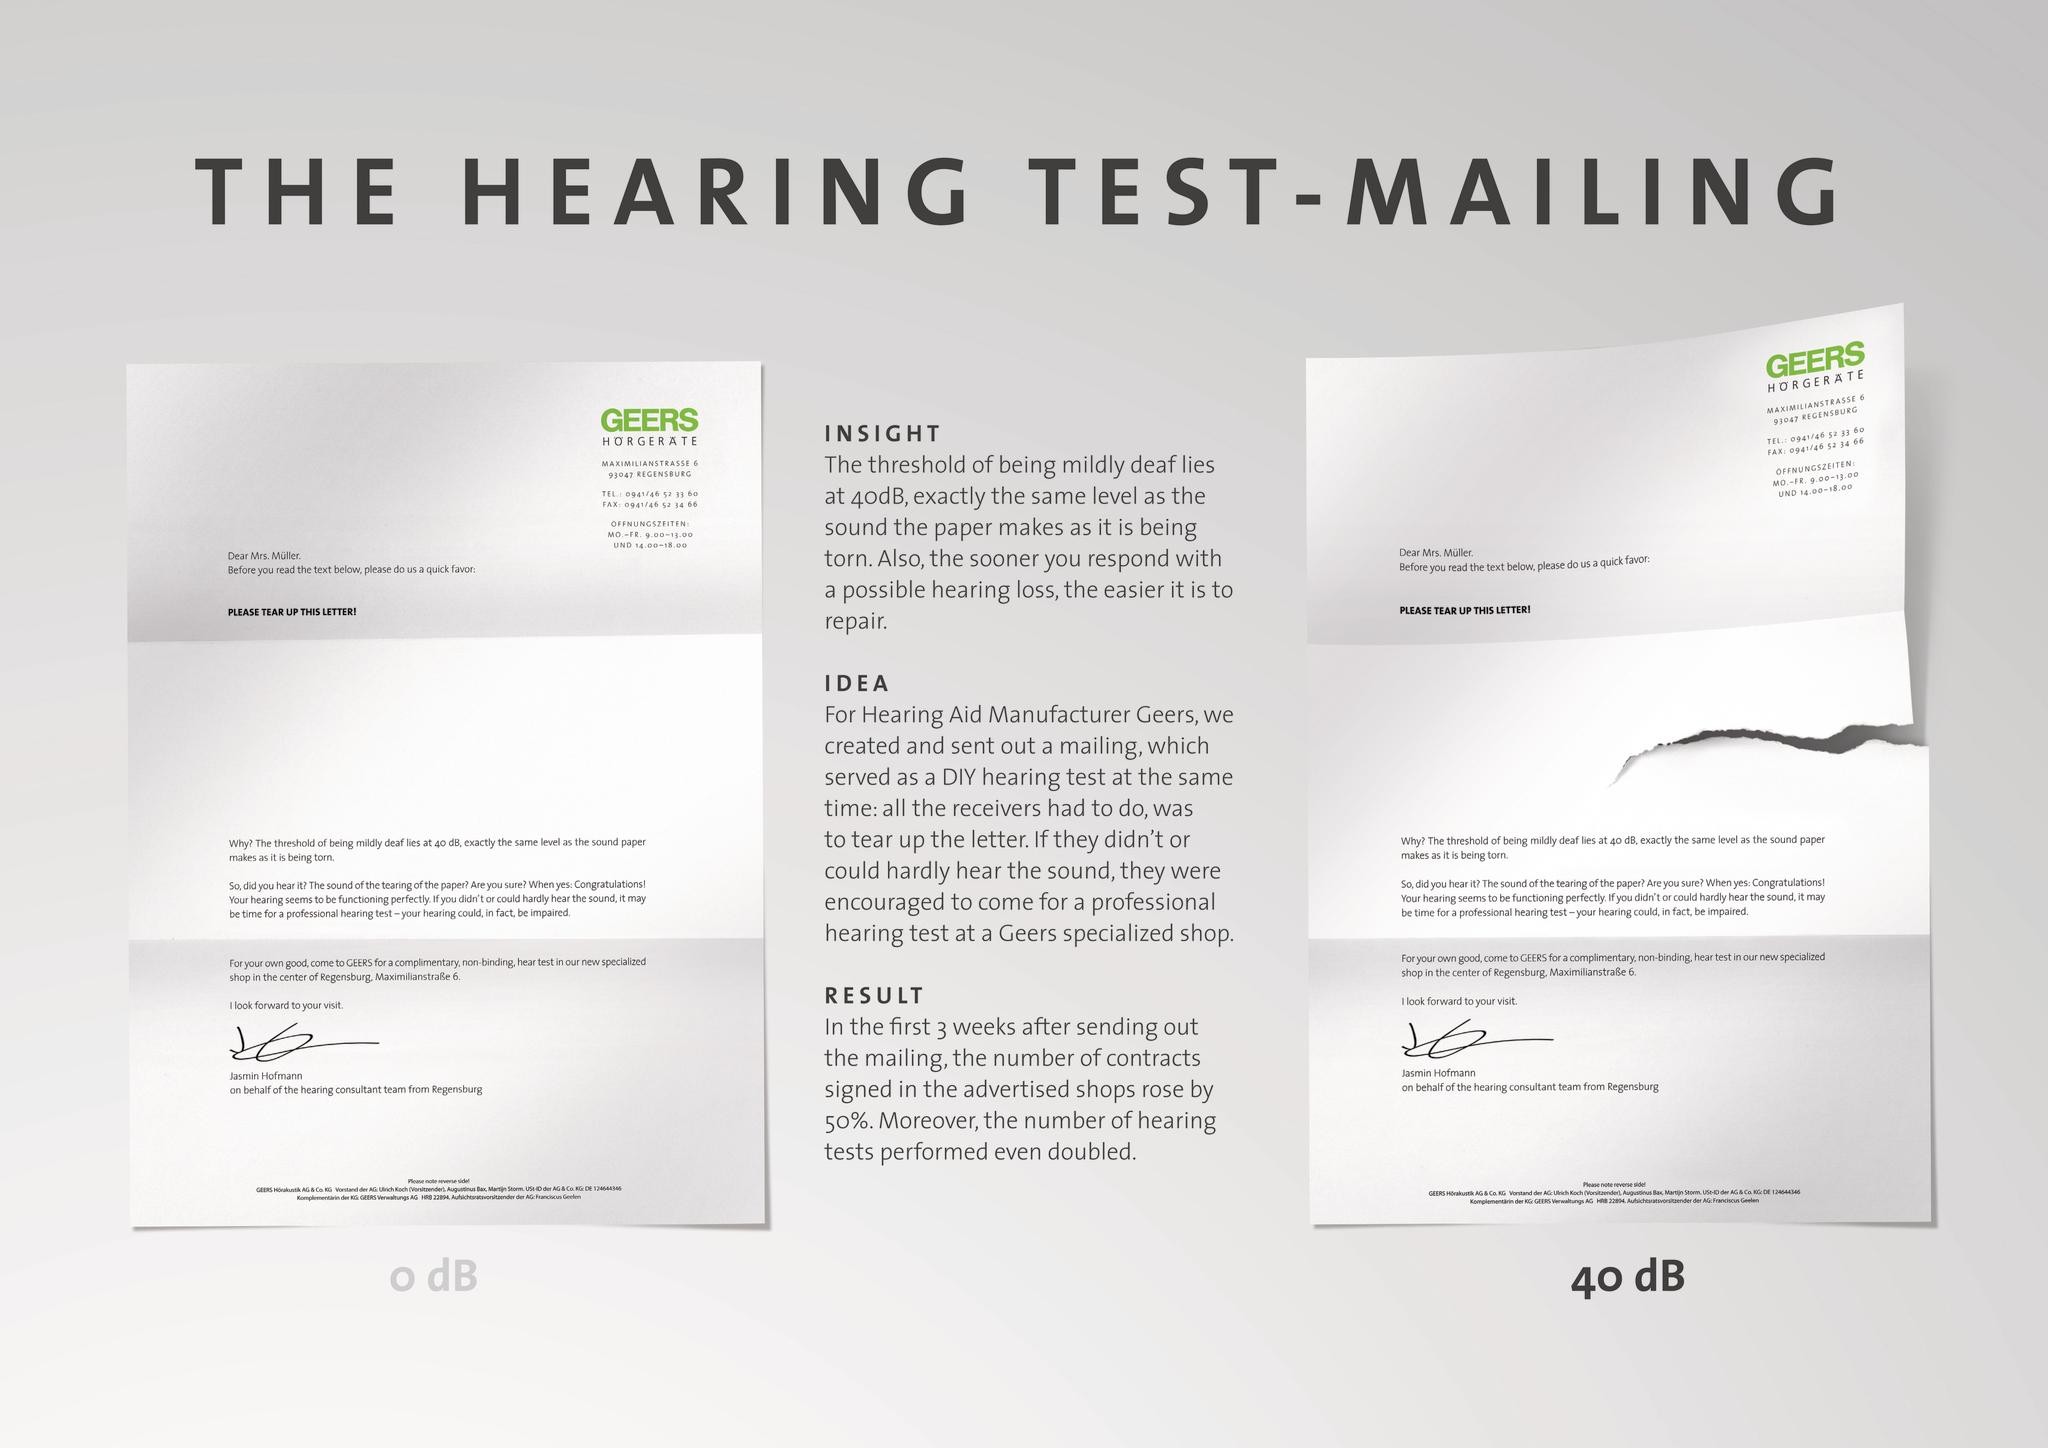 THE HEARING TEST-MAILING